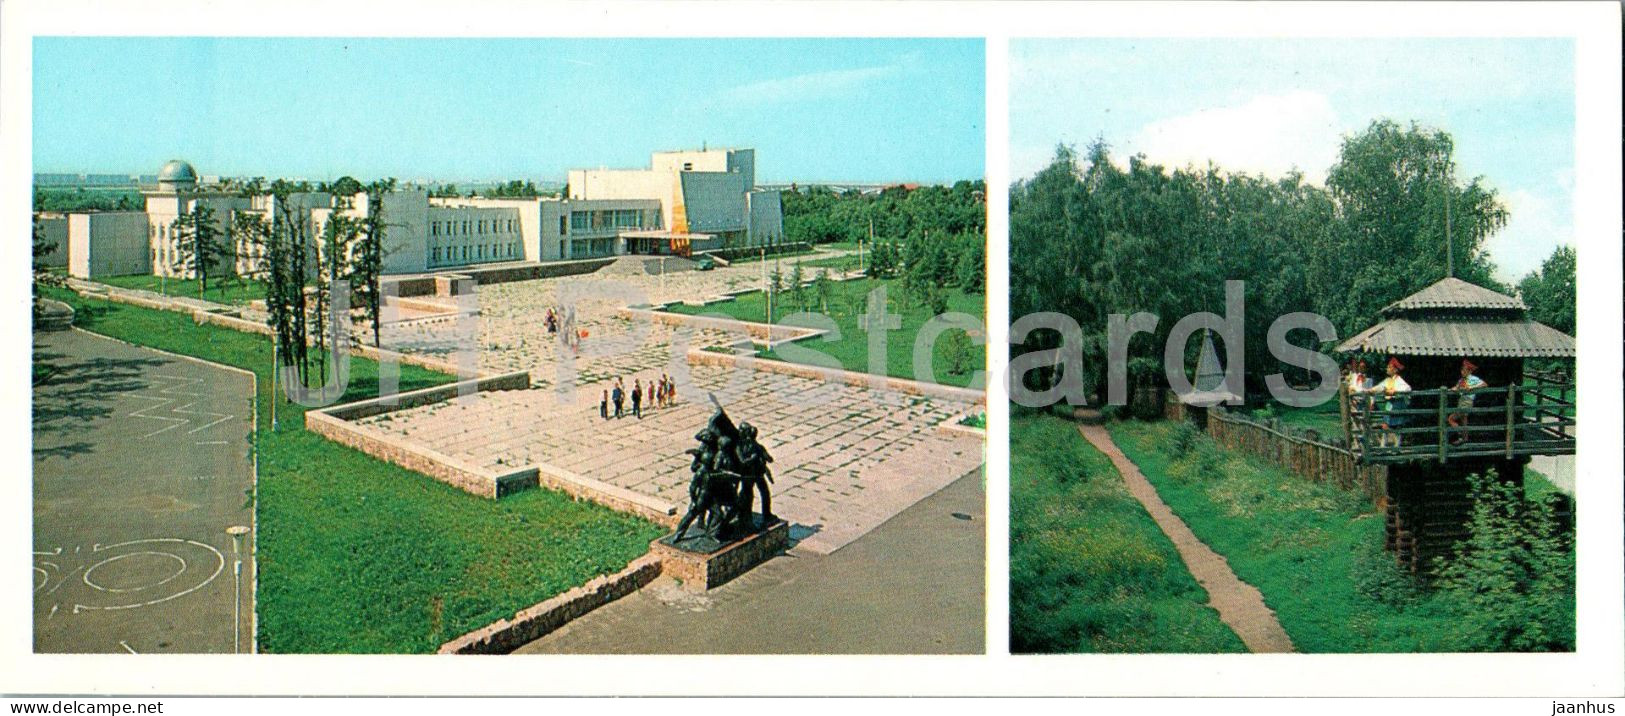 Omsk - Pioneer Palace - Childrens Playground In The Park - 1982 - Russia USSR - Unused - Russie